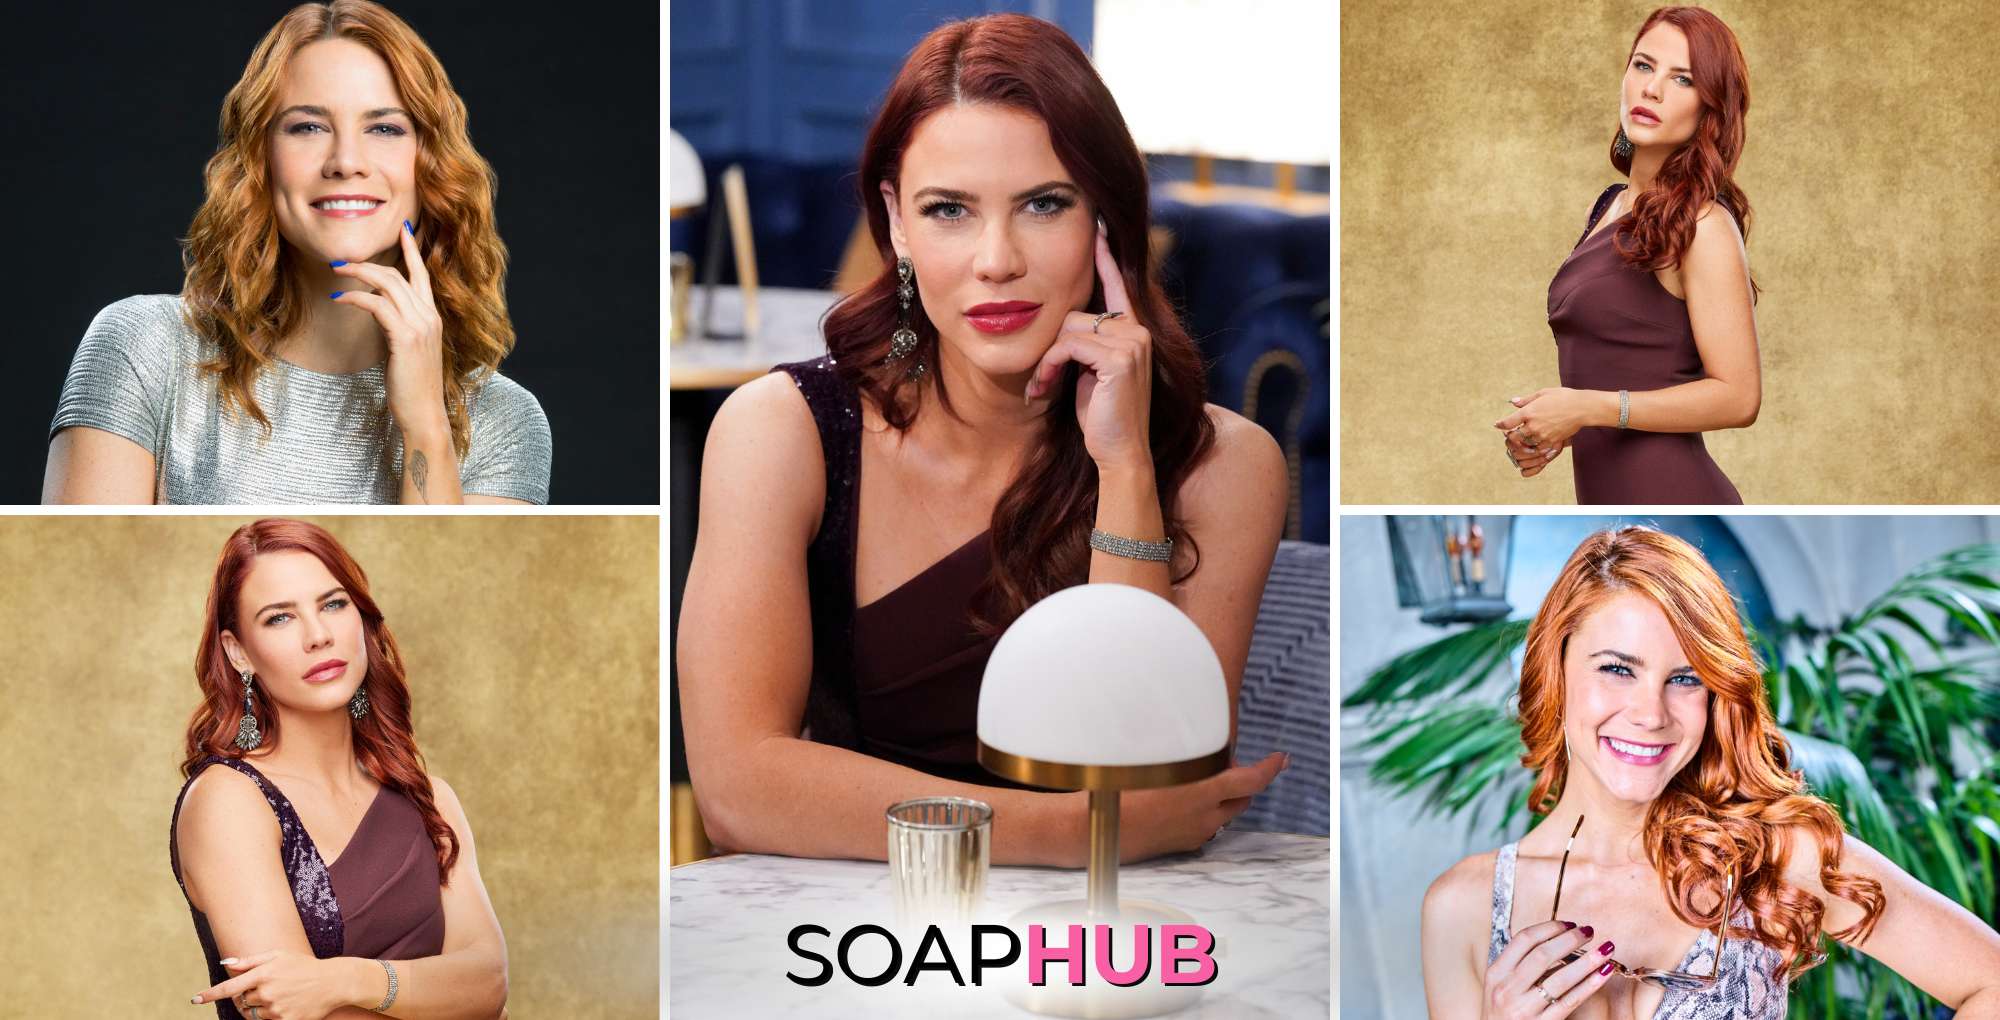 Courtney Hope from The Young and the Restless and The Bold and the Beautiful with the Soap Hub logo across the bottom.